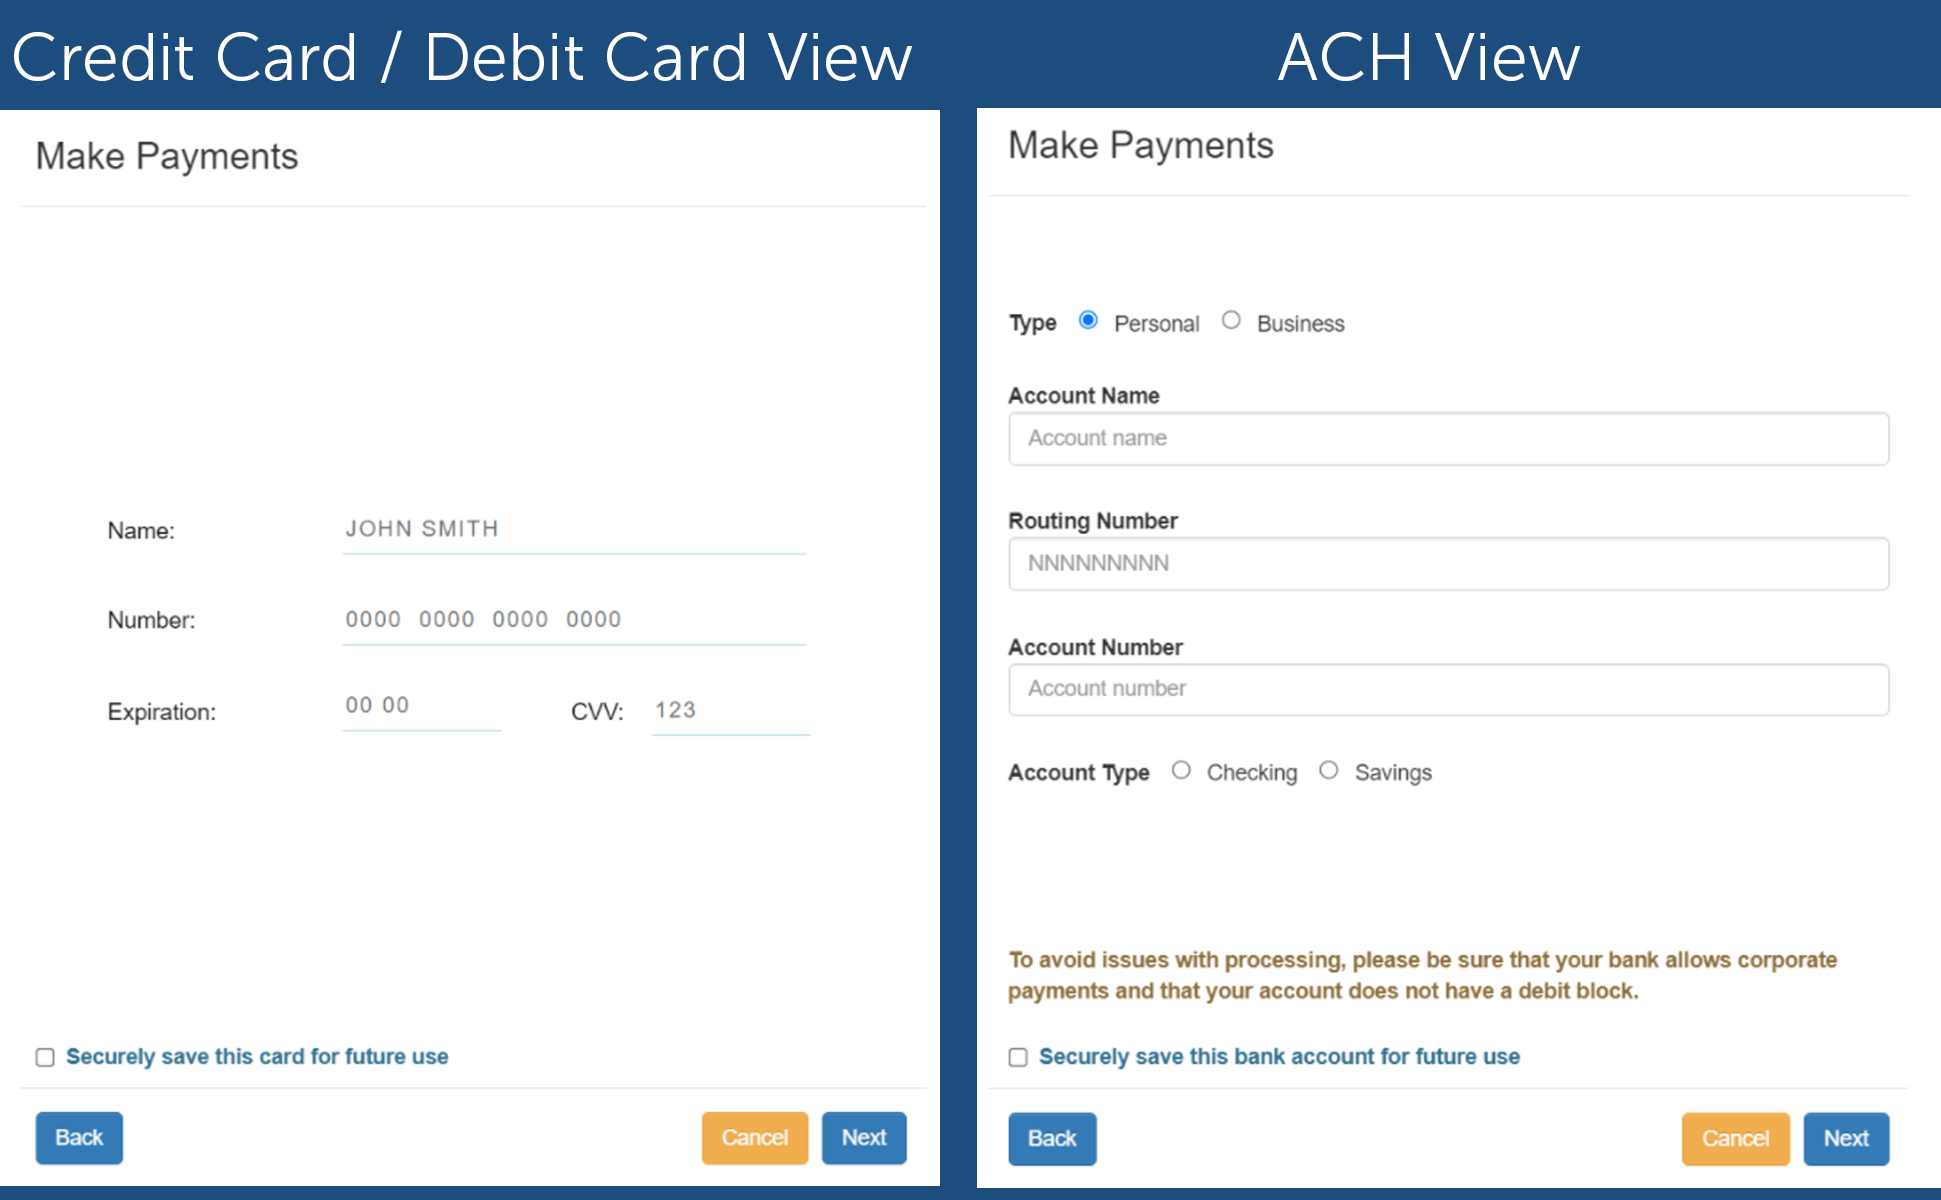 image of debit card view and ach payment view on payment screen